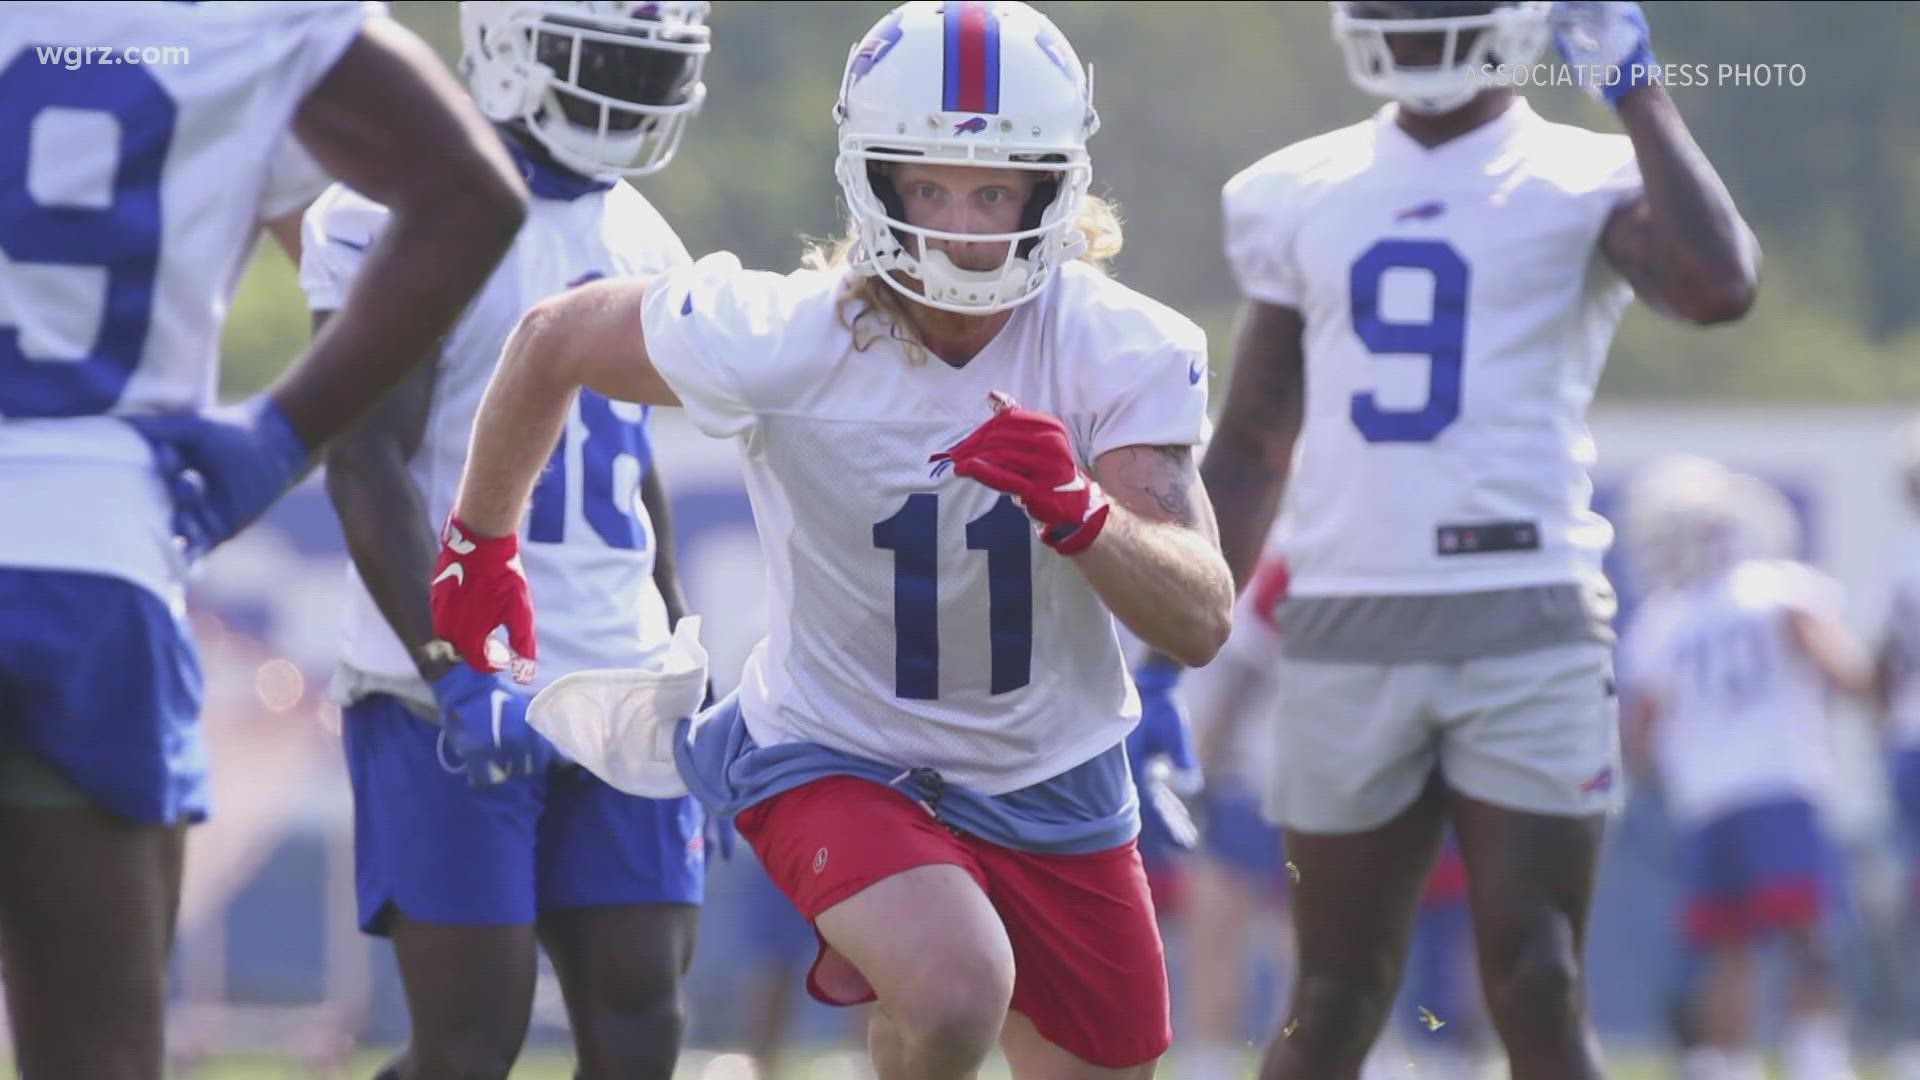 Four Bills players are now quarantining away from team facilities after being named close contacts of a staff member who tested positive for COVID.